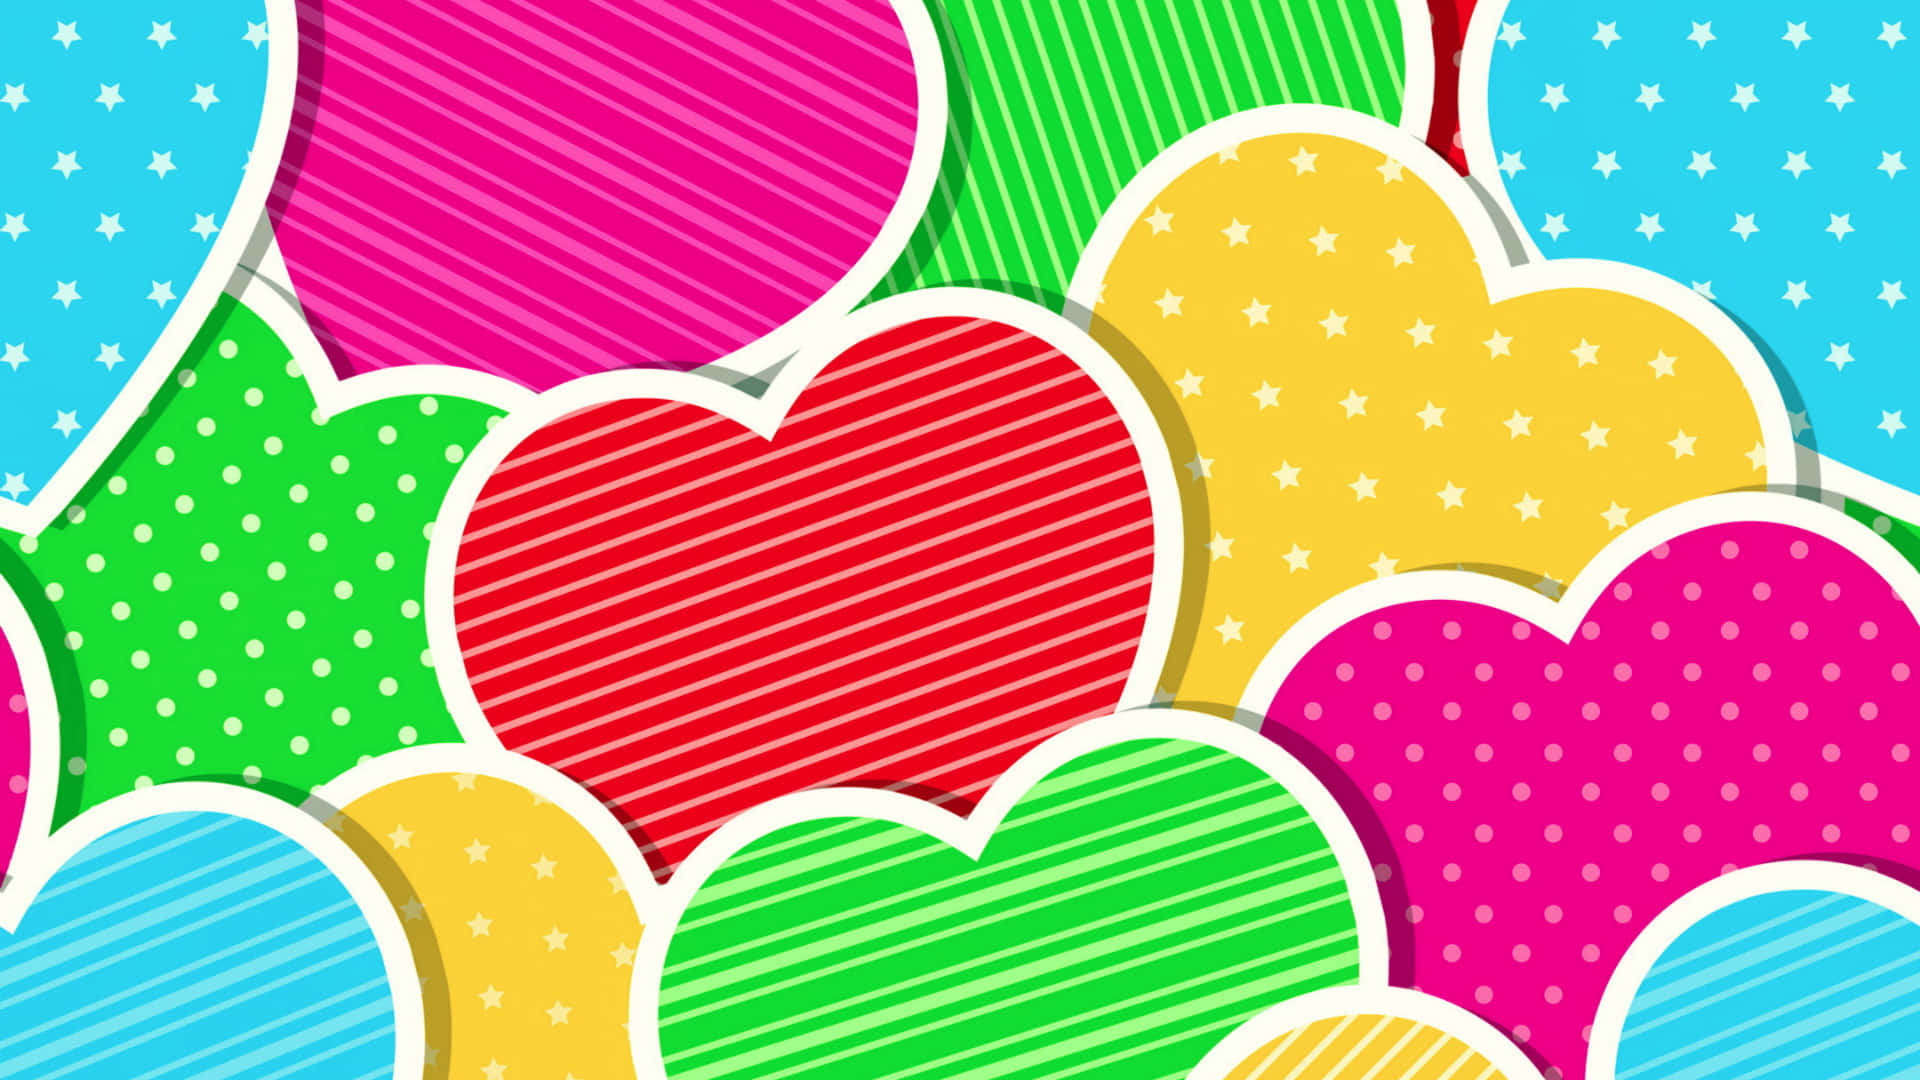 cute colourful wallpapers